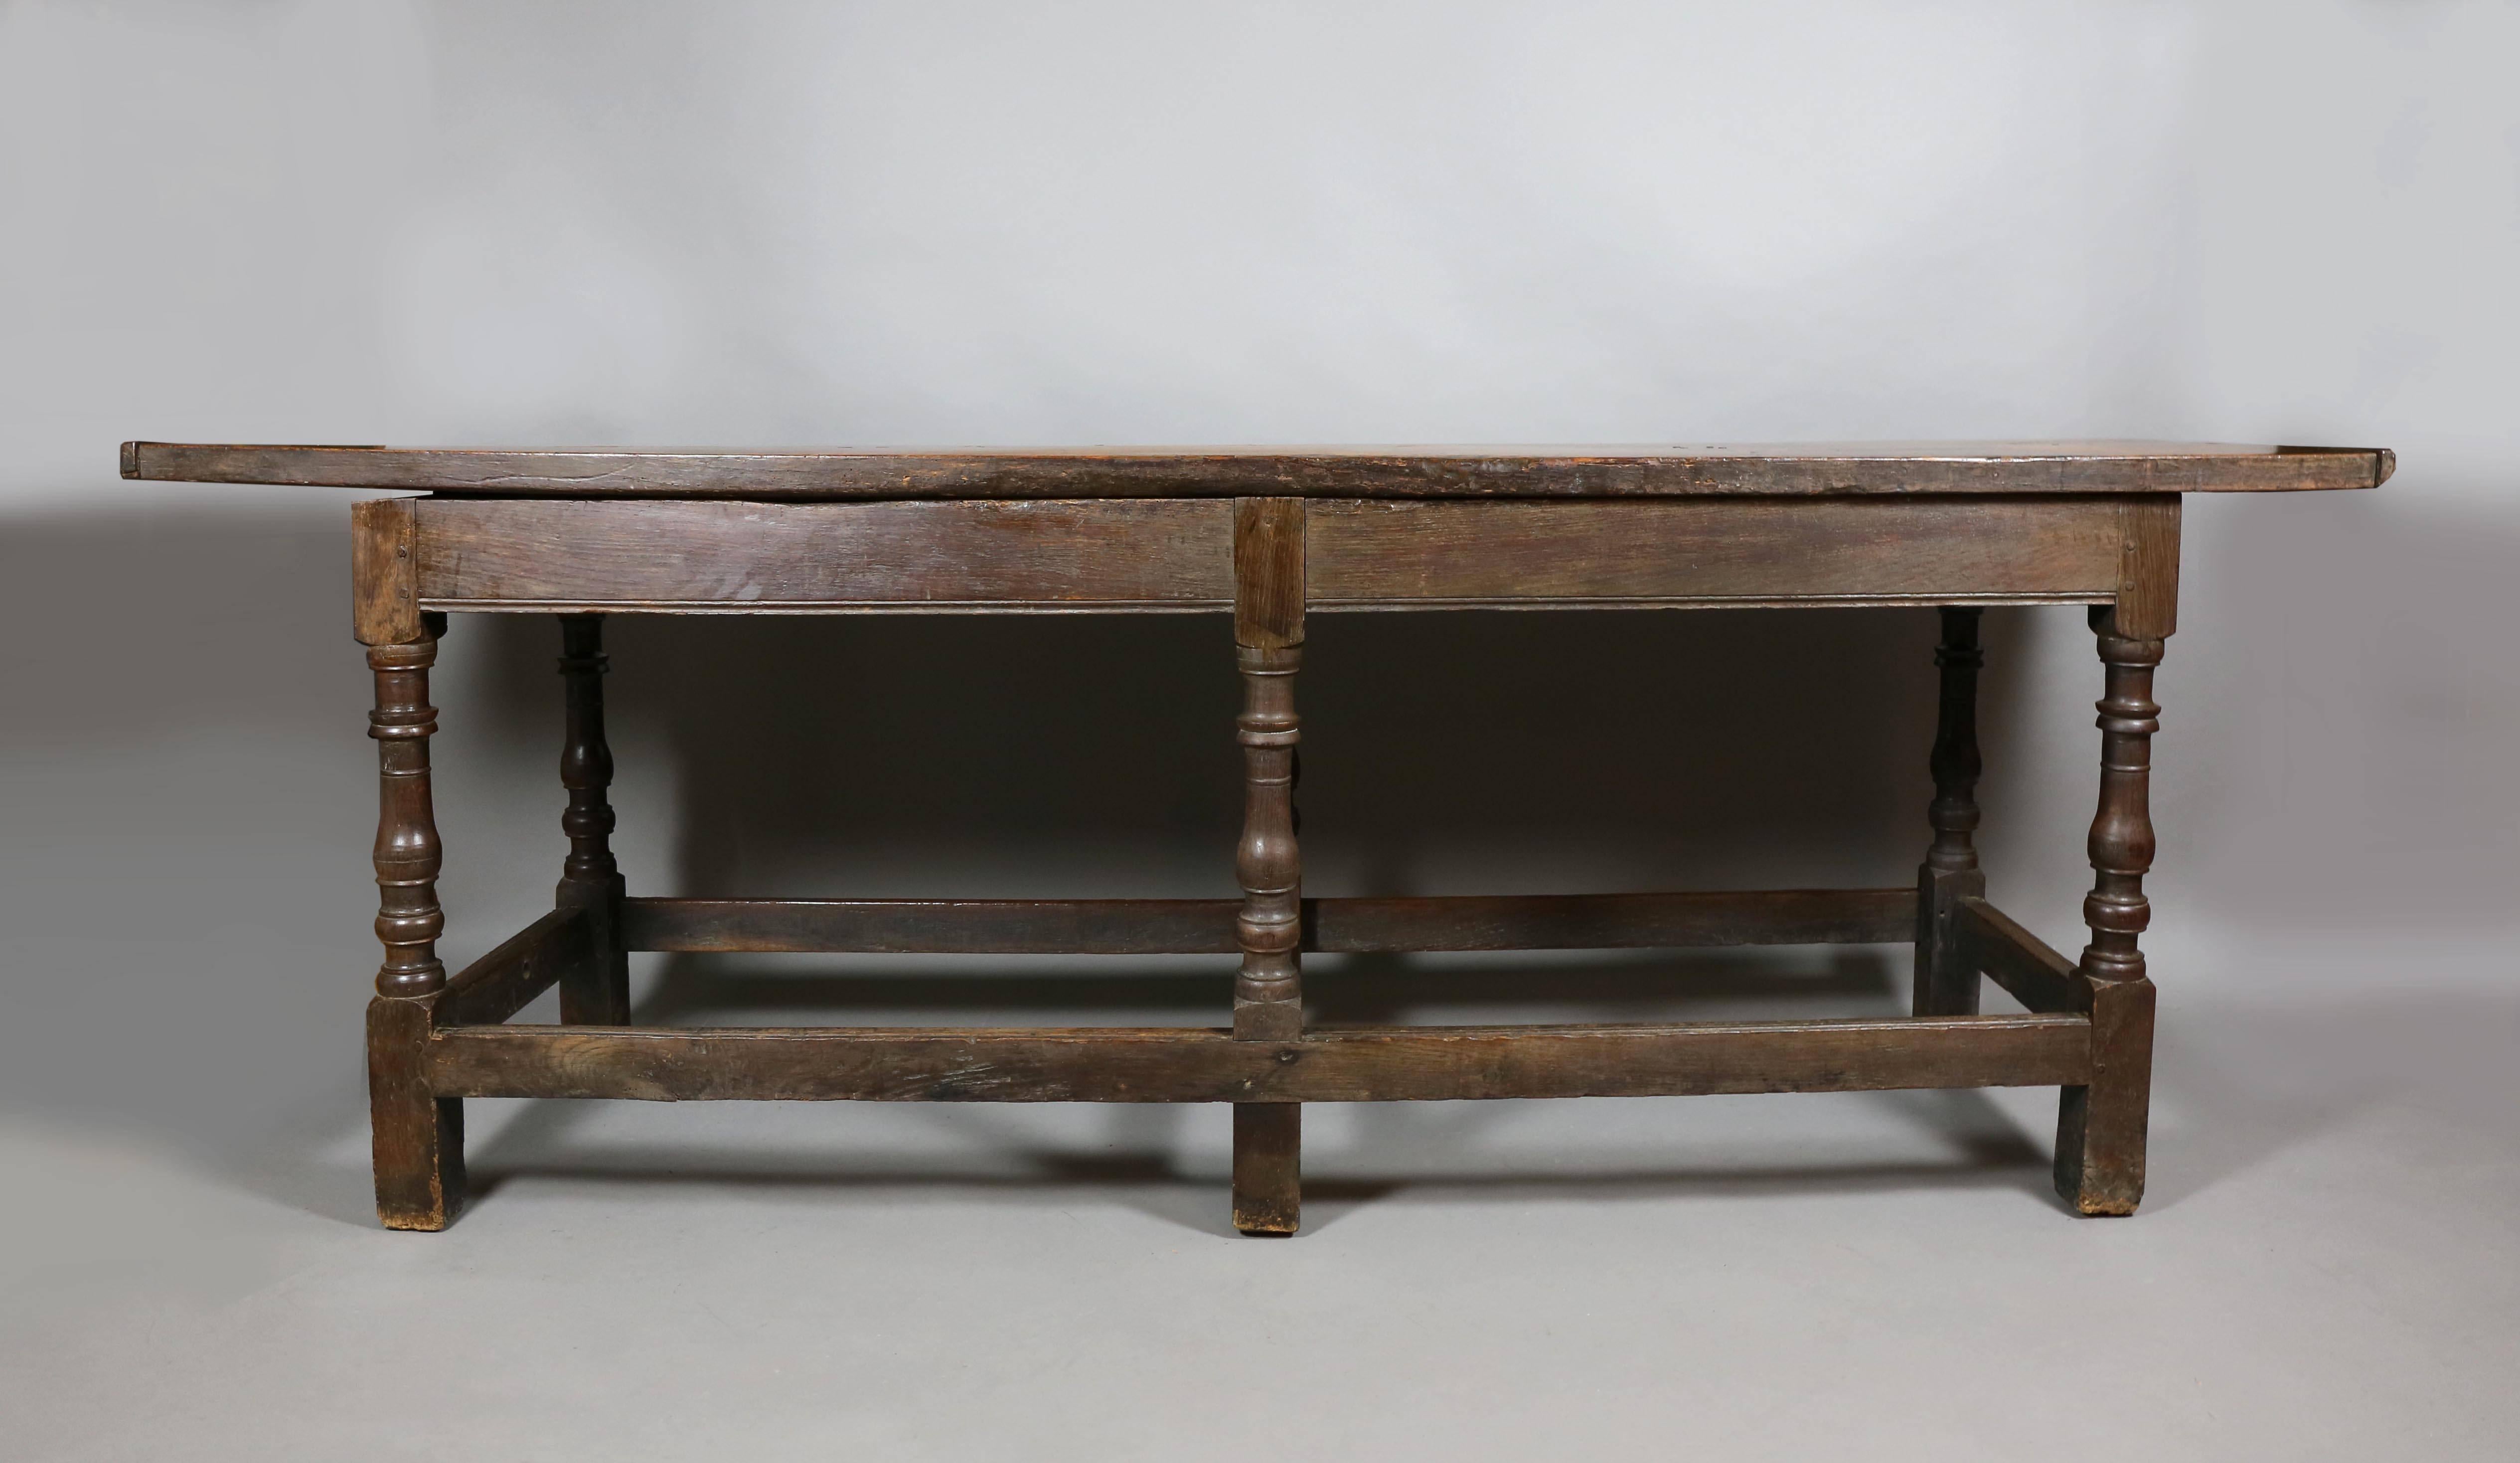 Two board top with battened ends over a plain frieze raised on turned legs, joined by stretchers on square feet. Top has beautiful waxed patina.